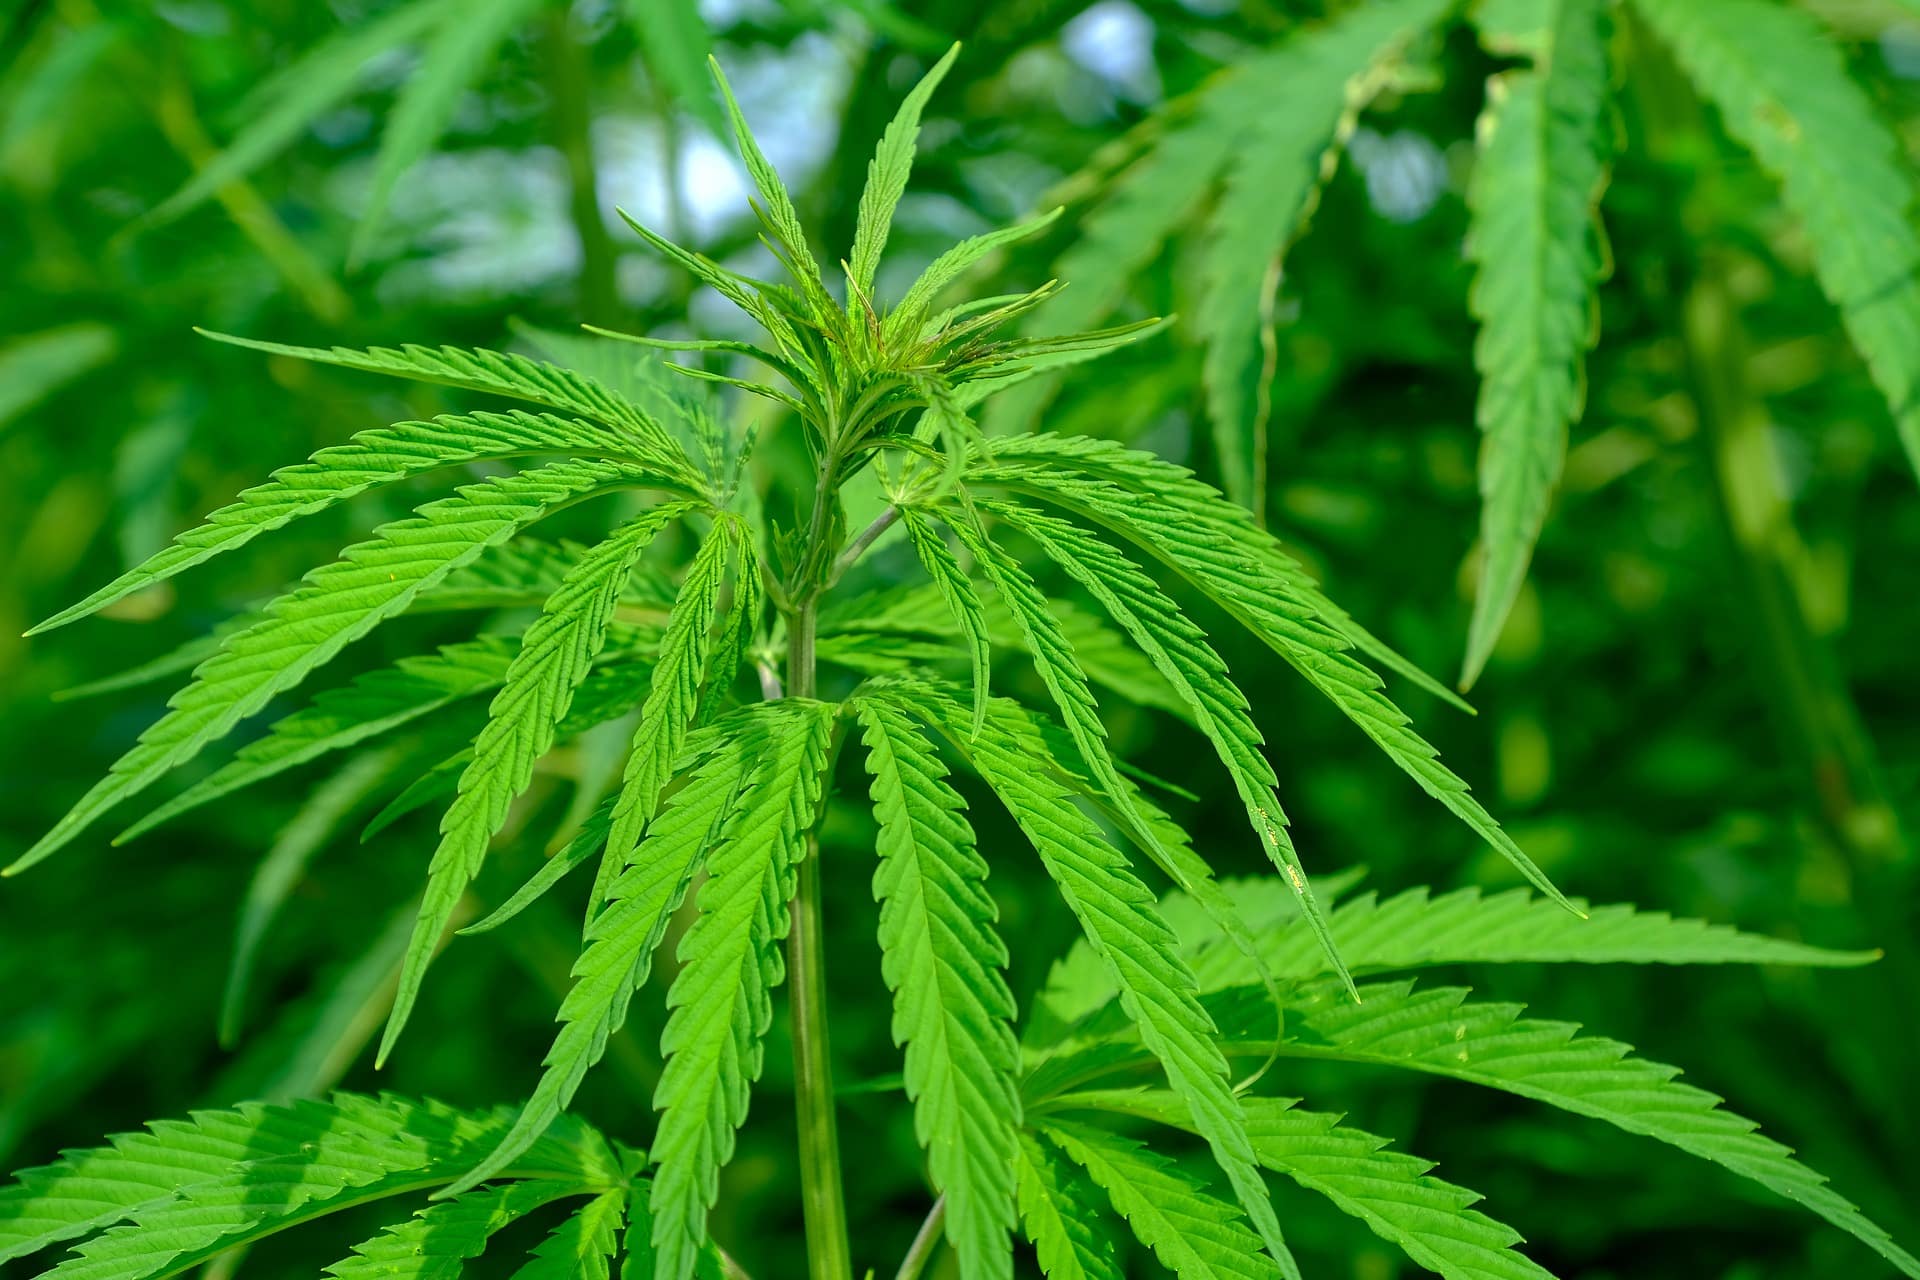 A person holding a cannabis sativa plant